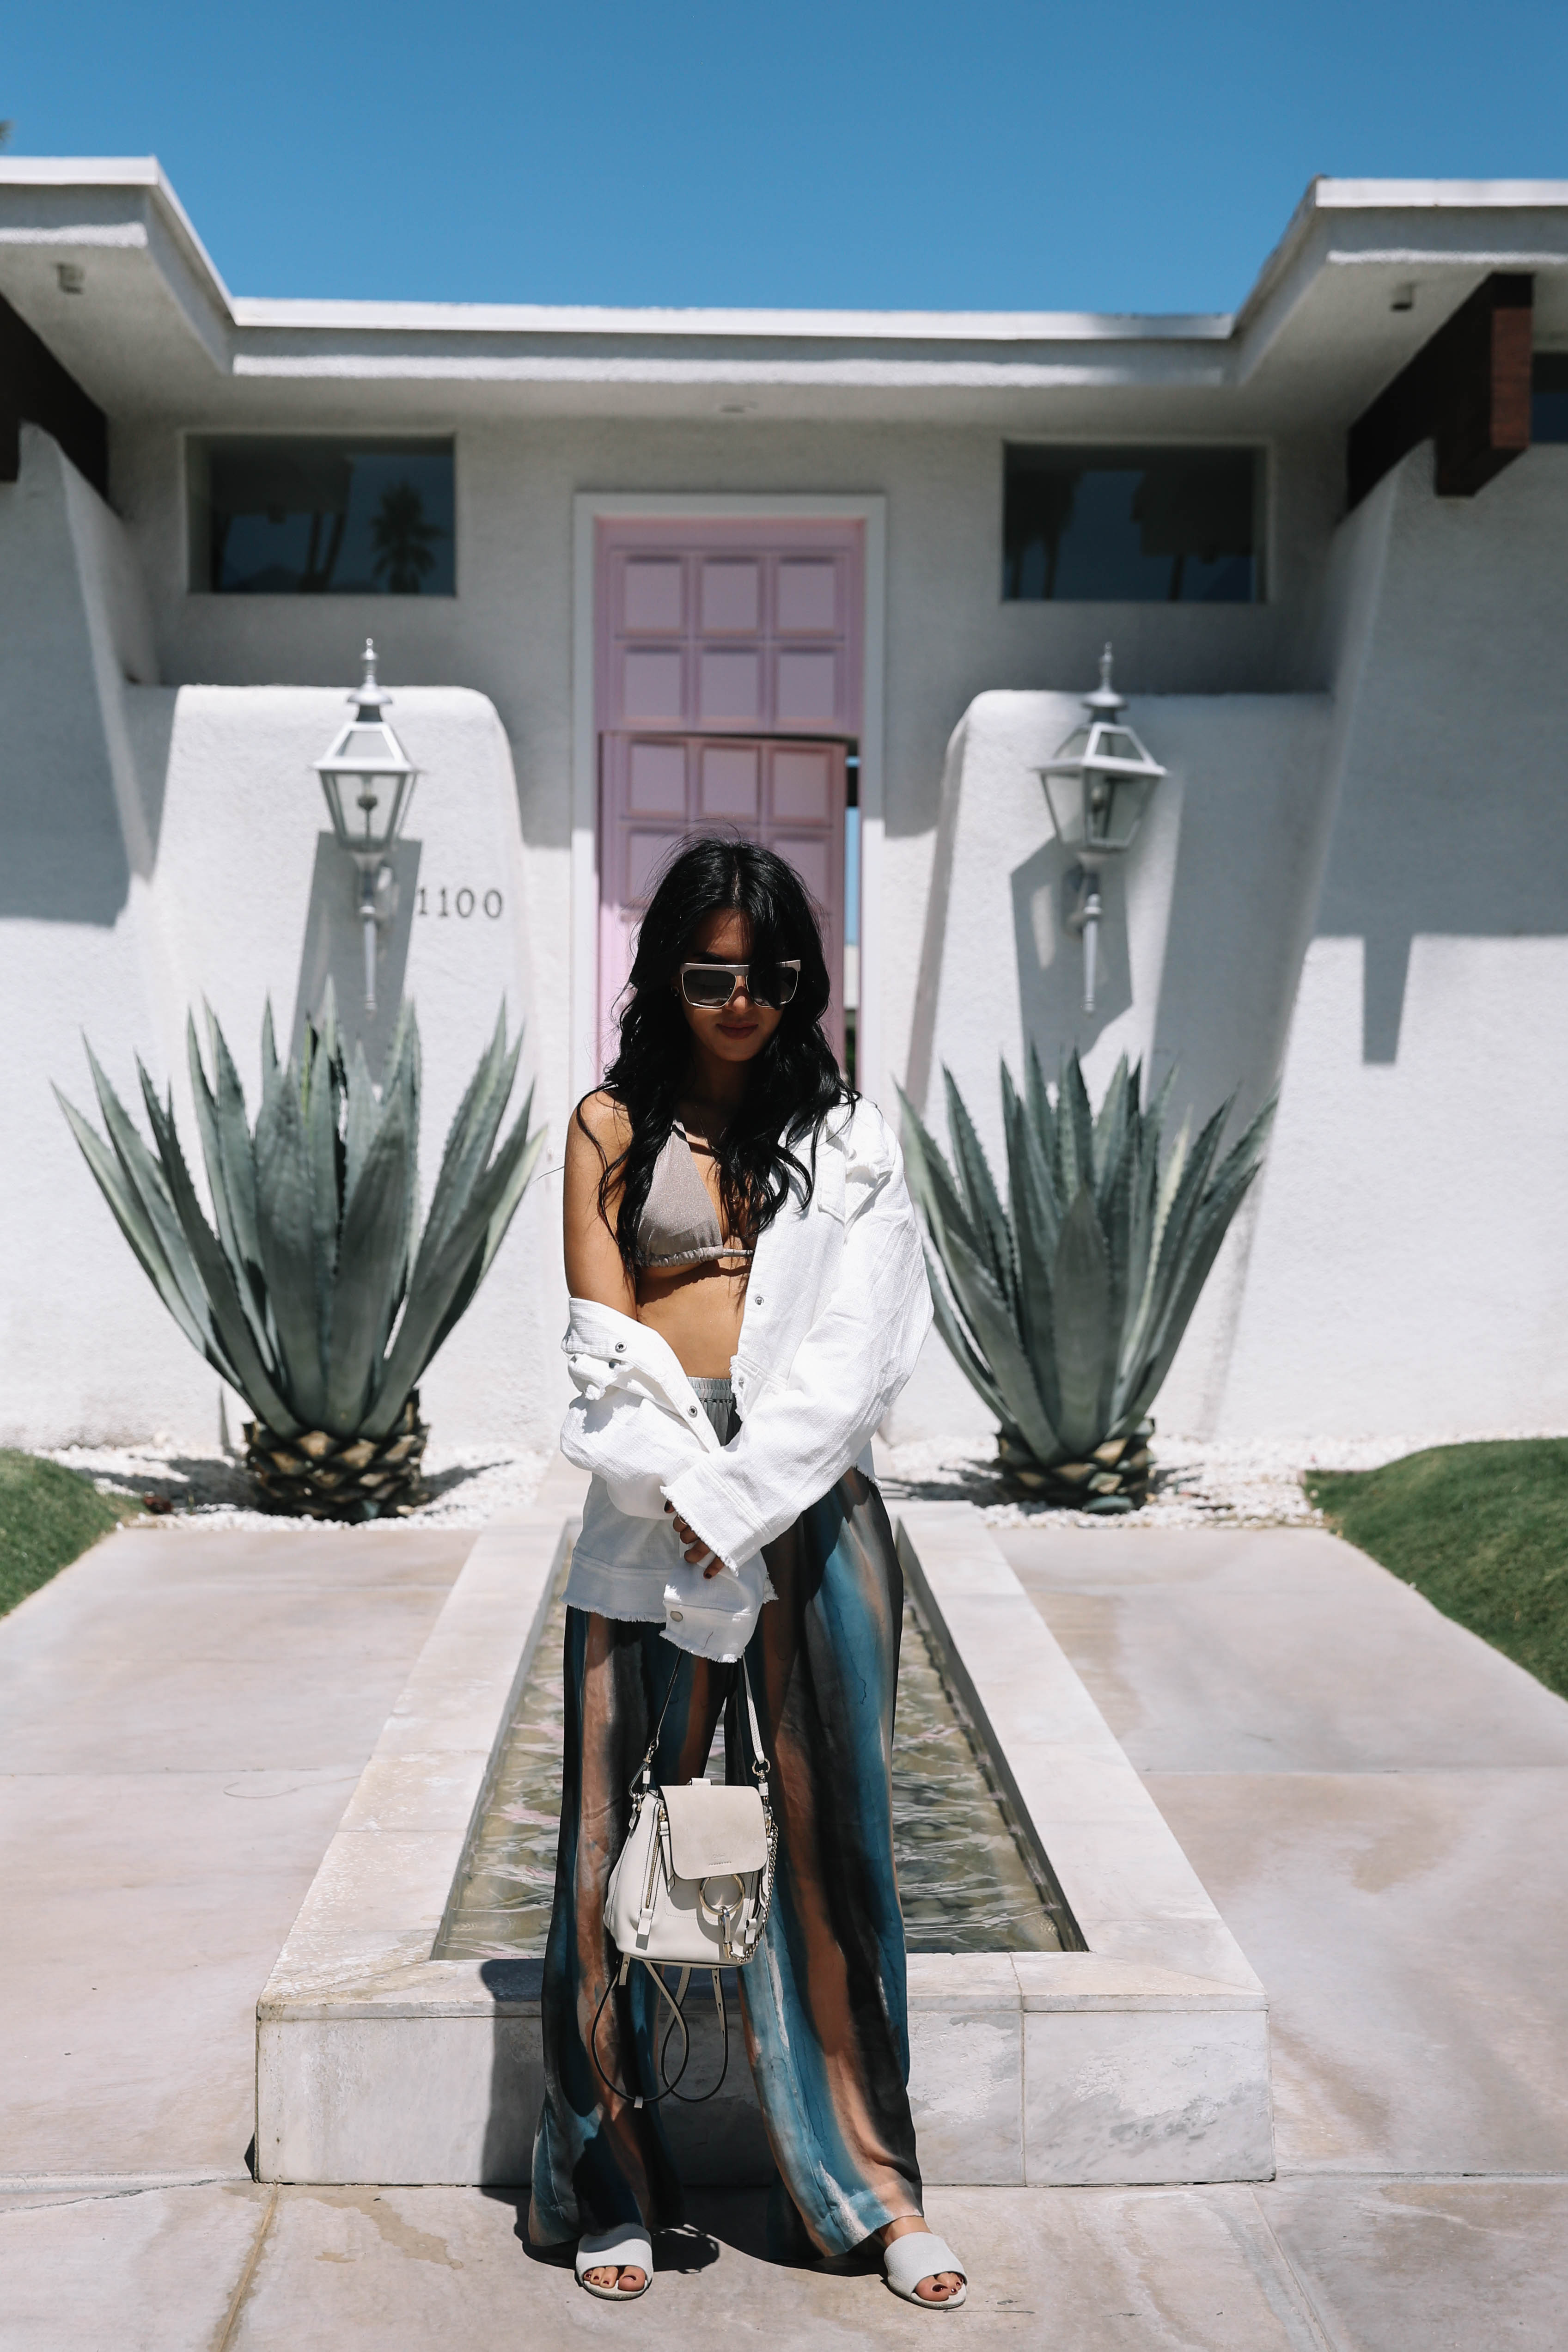 LA Blogger Tania Sarin on coachella weekend featuring festival style with raquel allegra pant and chloe mini backpack